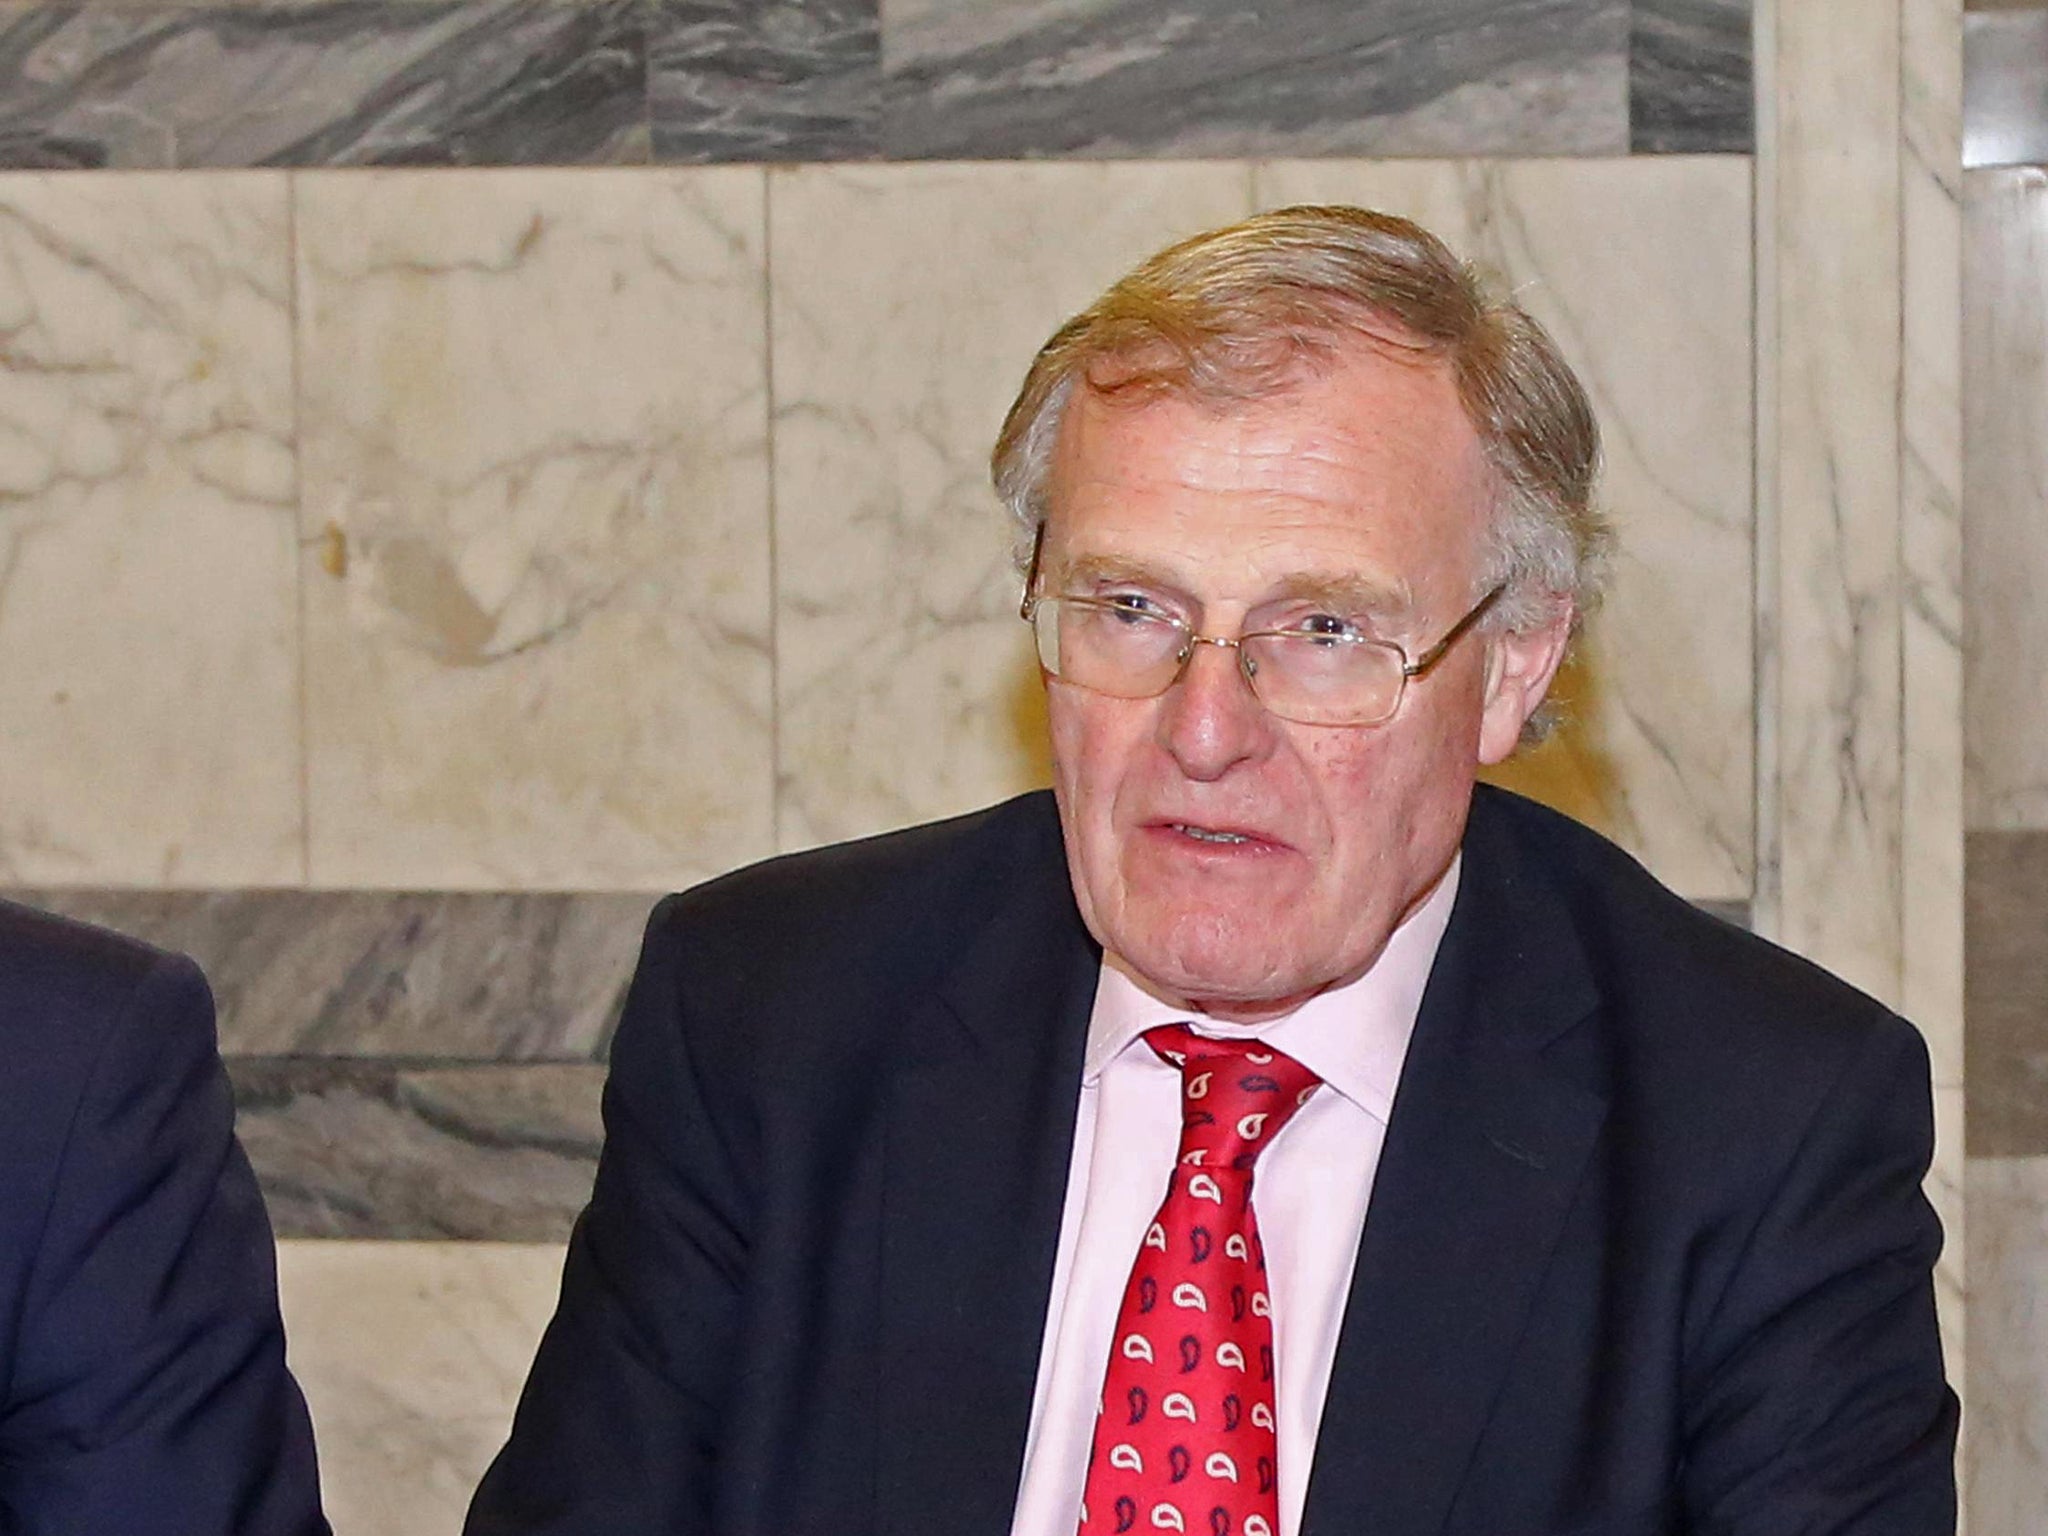 Christopher Chope’s red tie ought to have been a clue